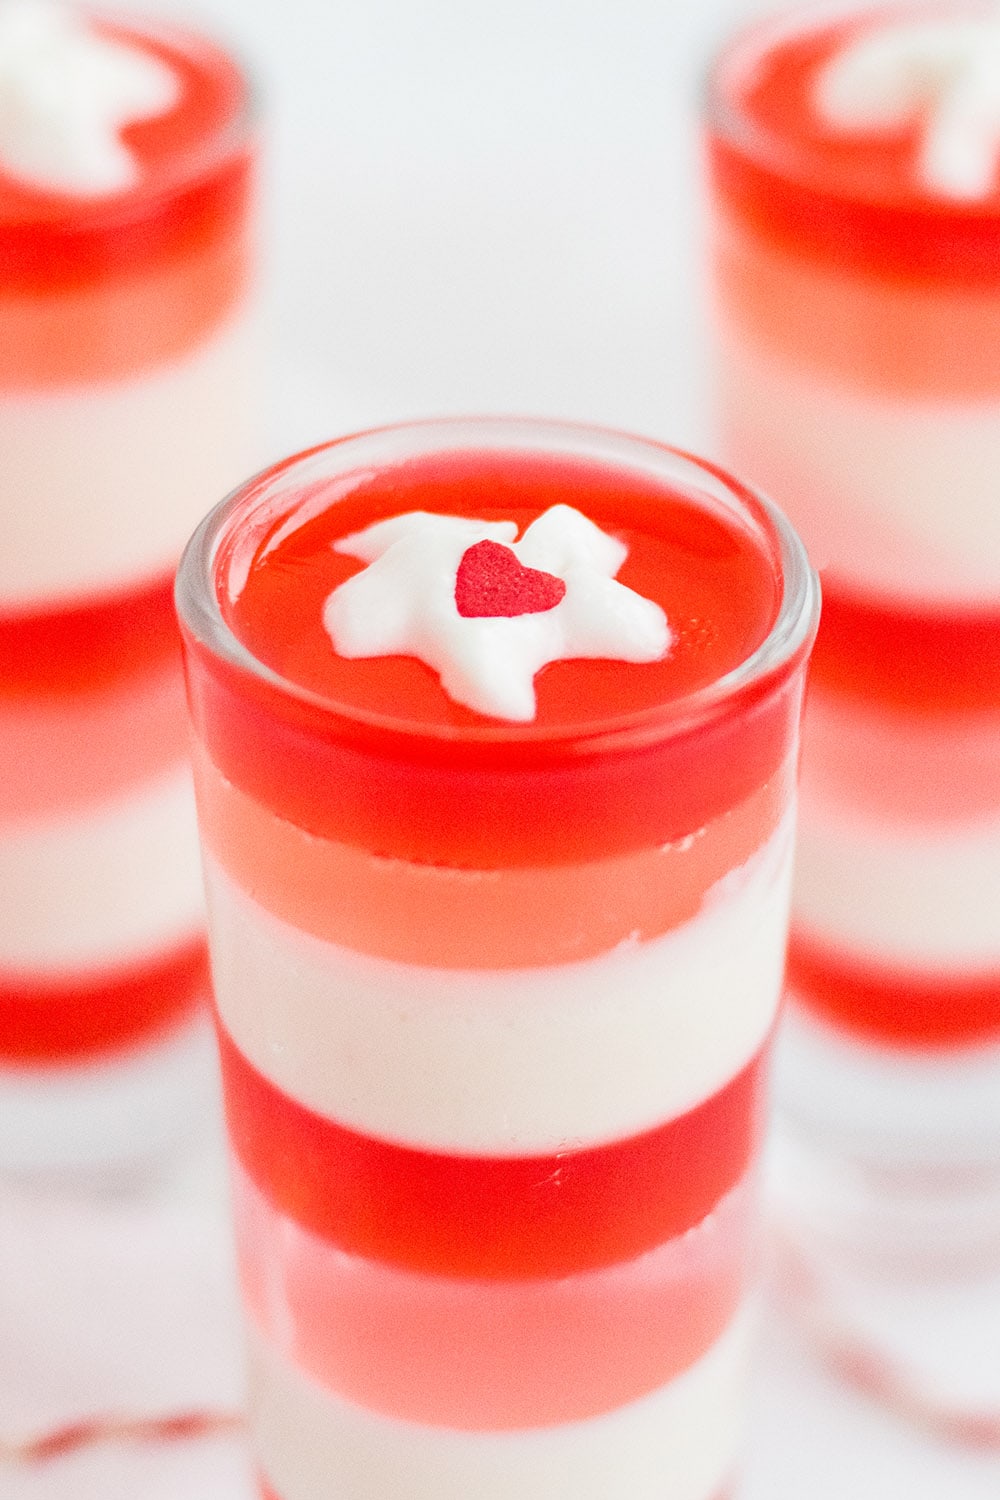 Top of layered jello with whipped cream dollop.